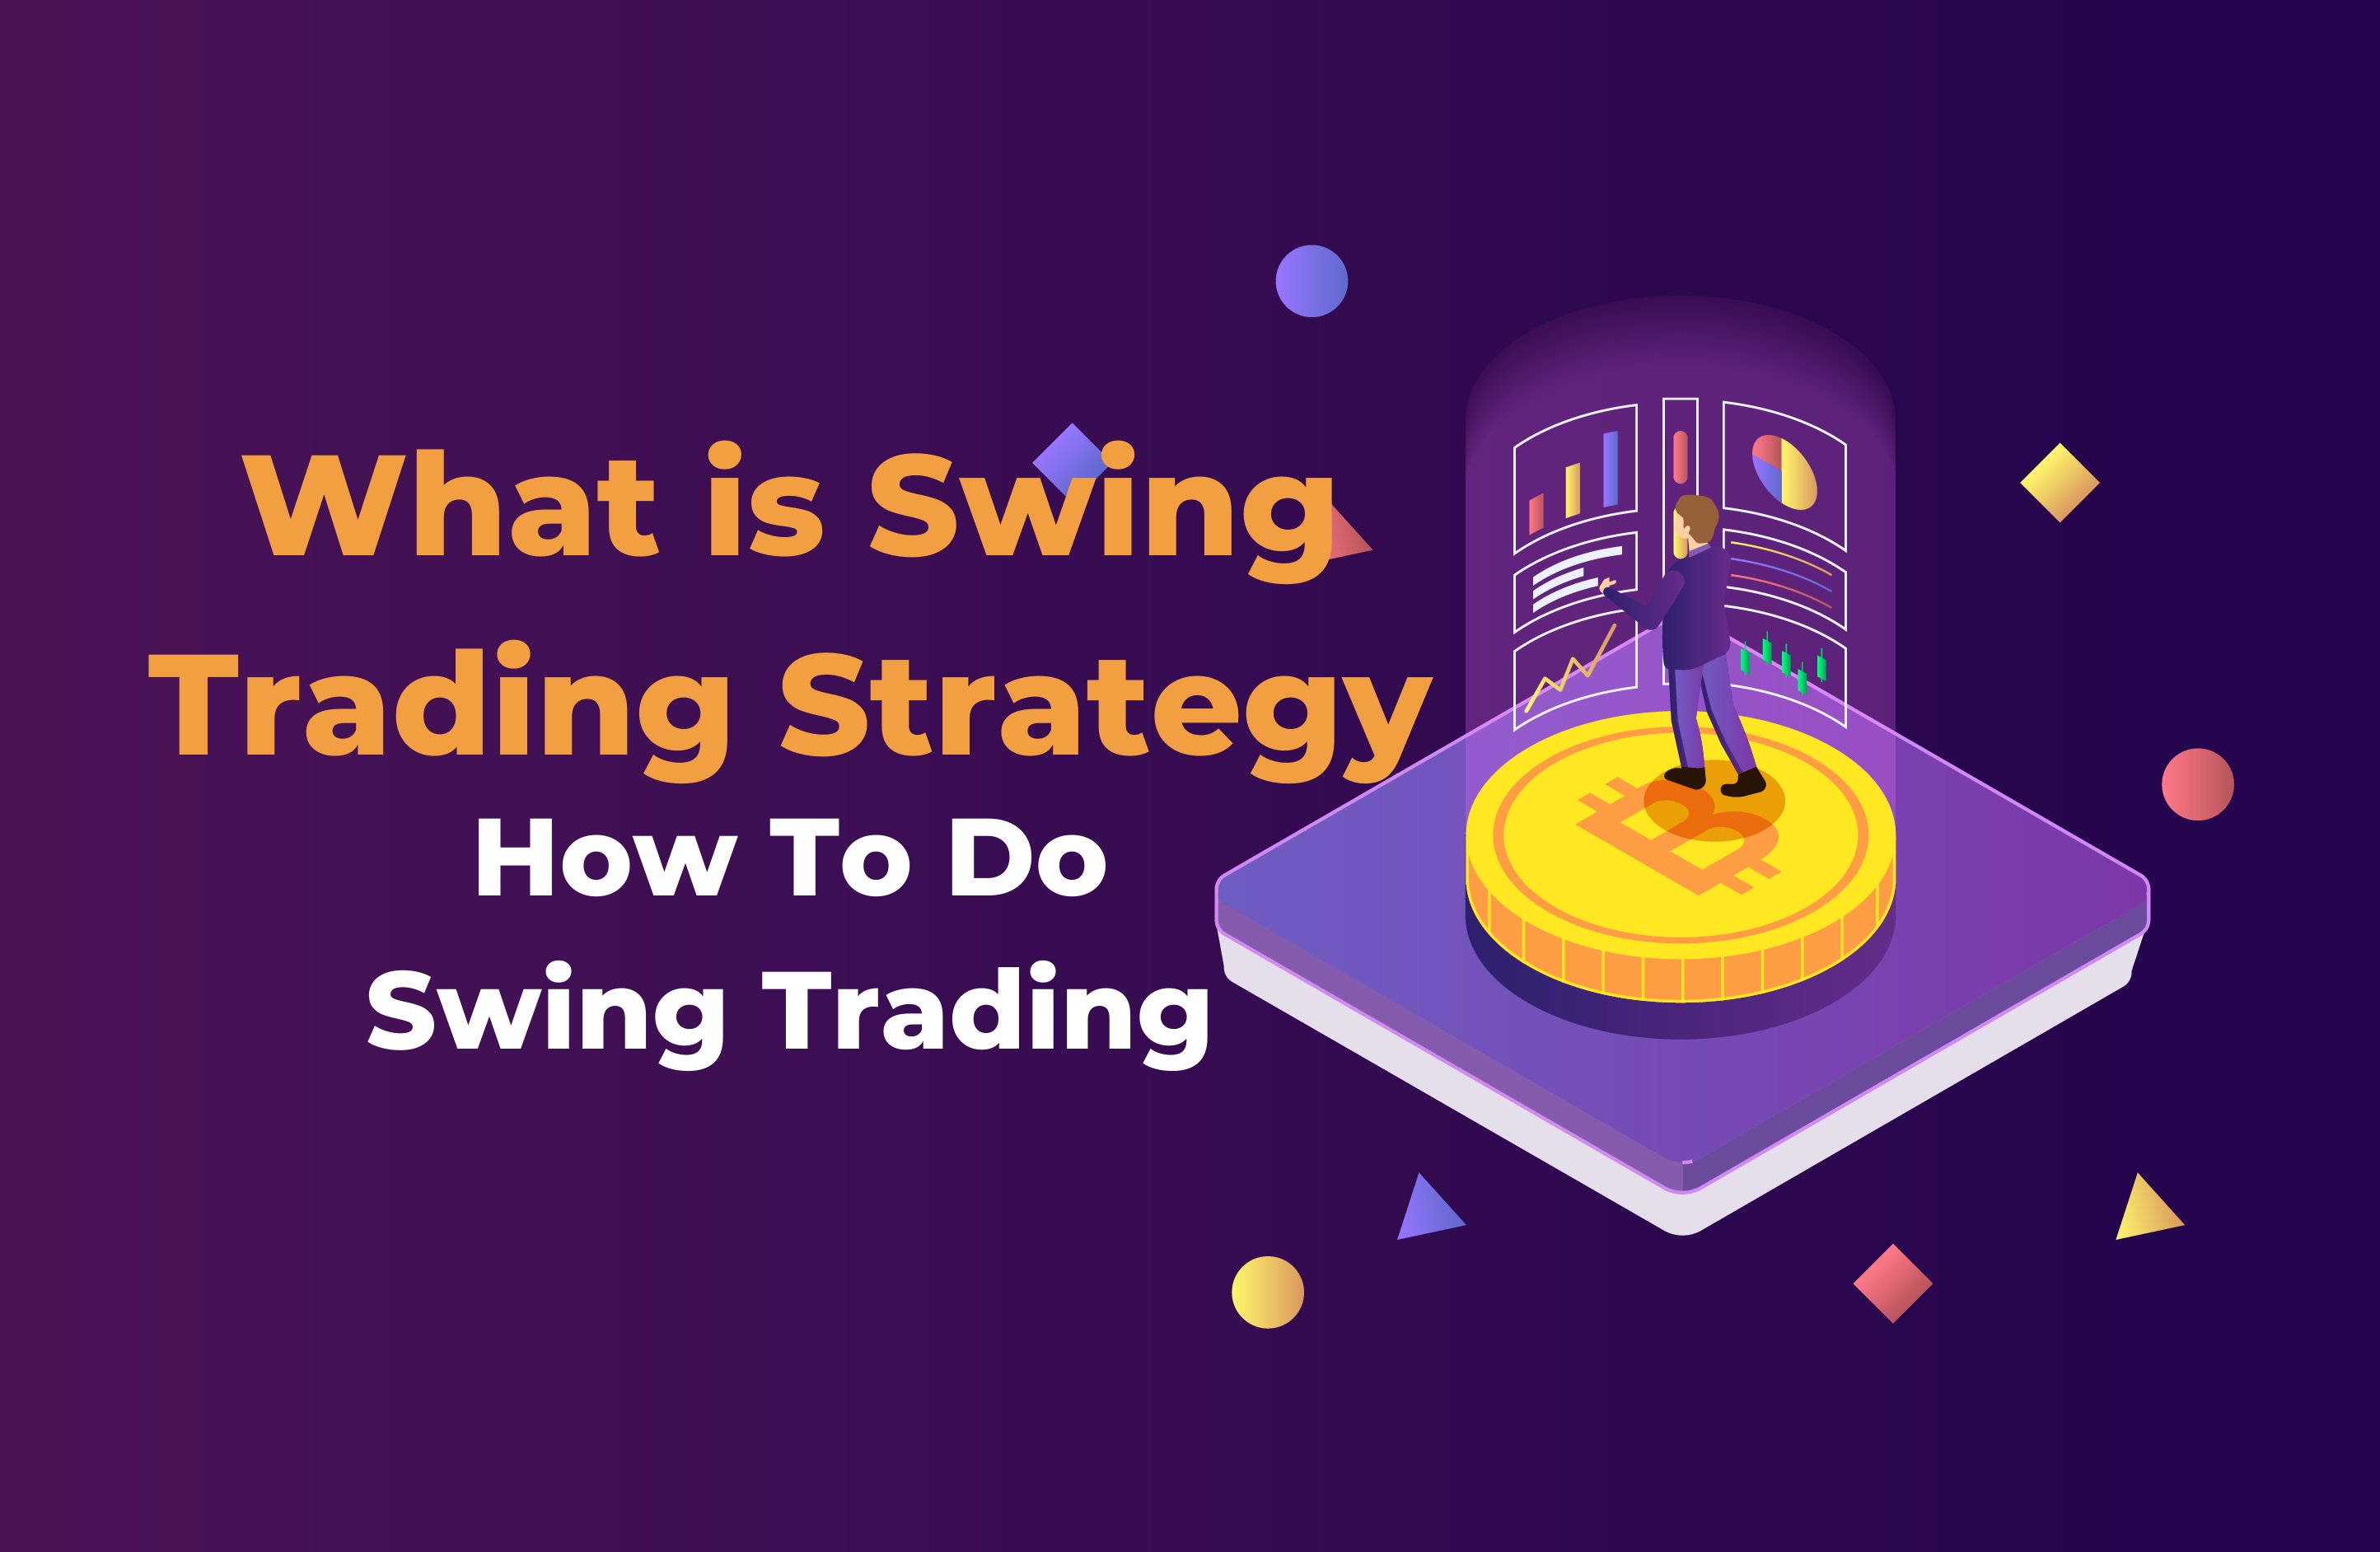 What is Swing Trading Strategy